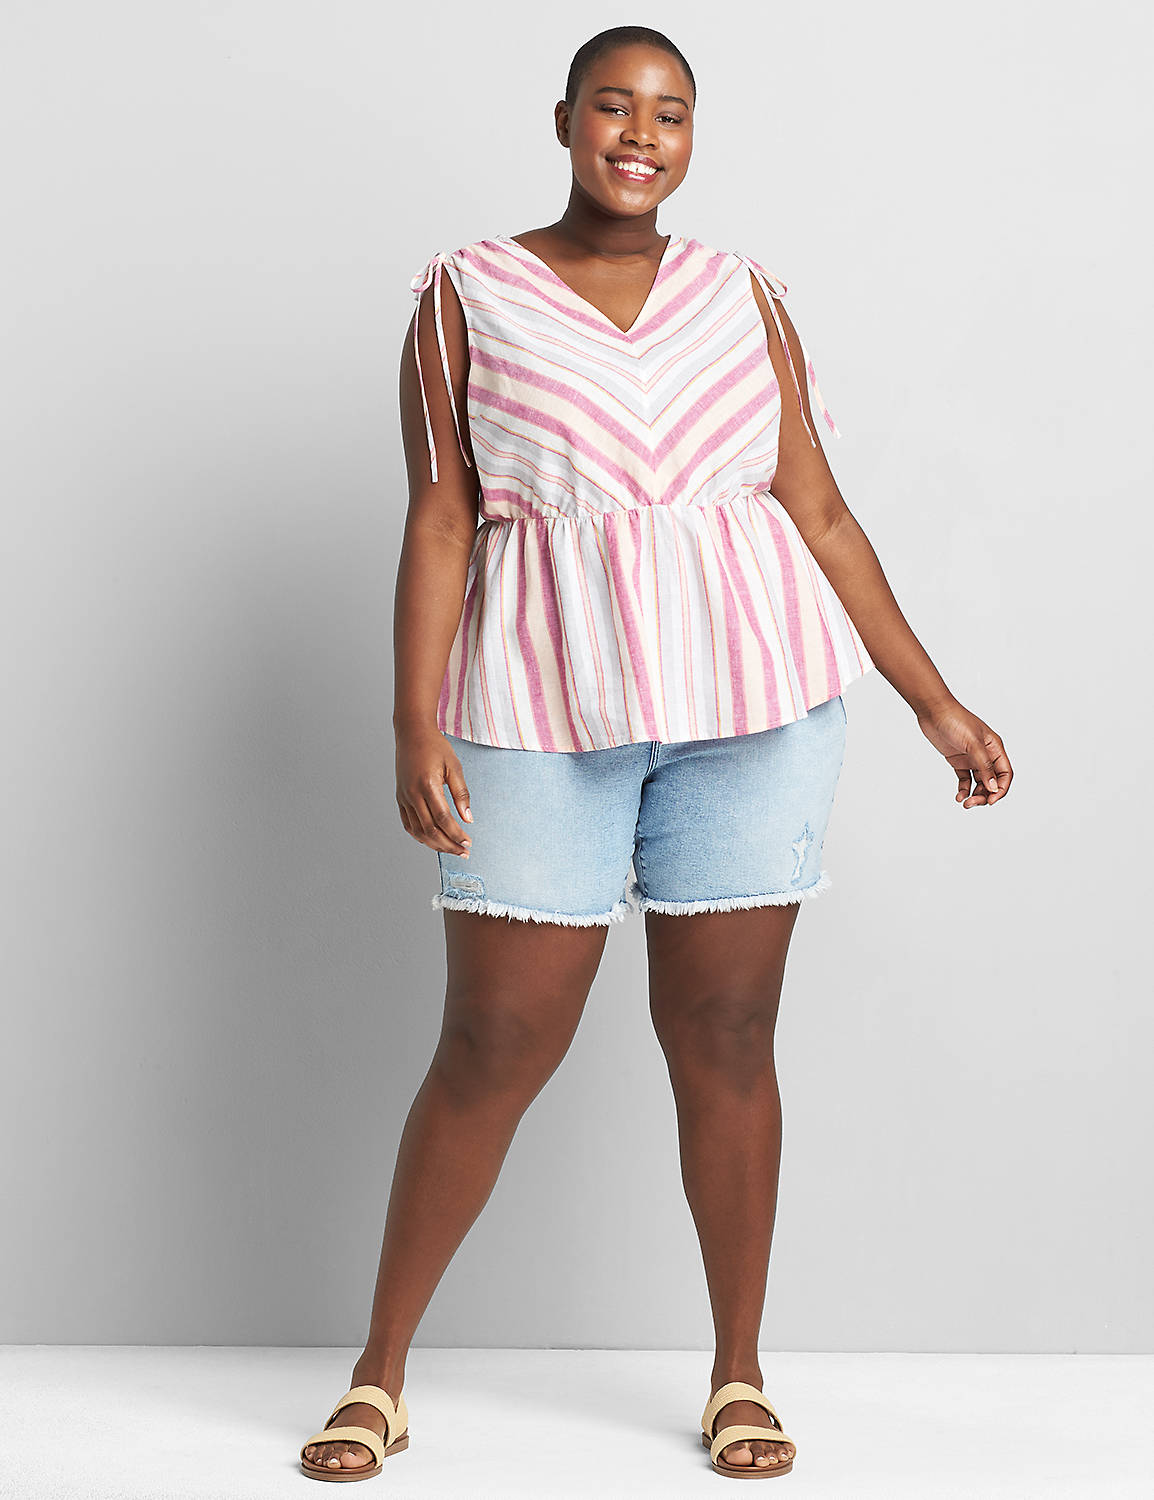 Striped Tie-Shoulder Top Product Image 3